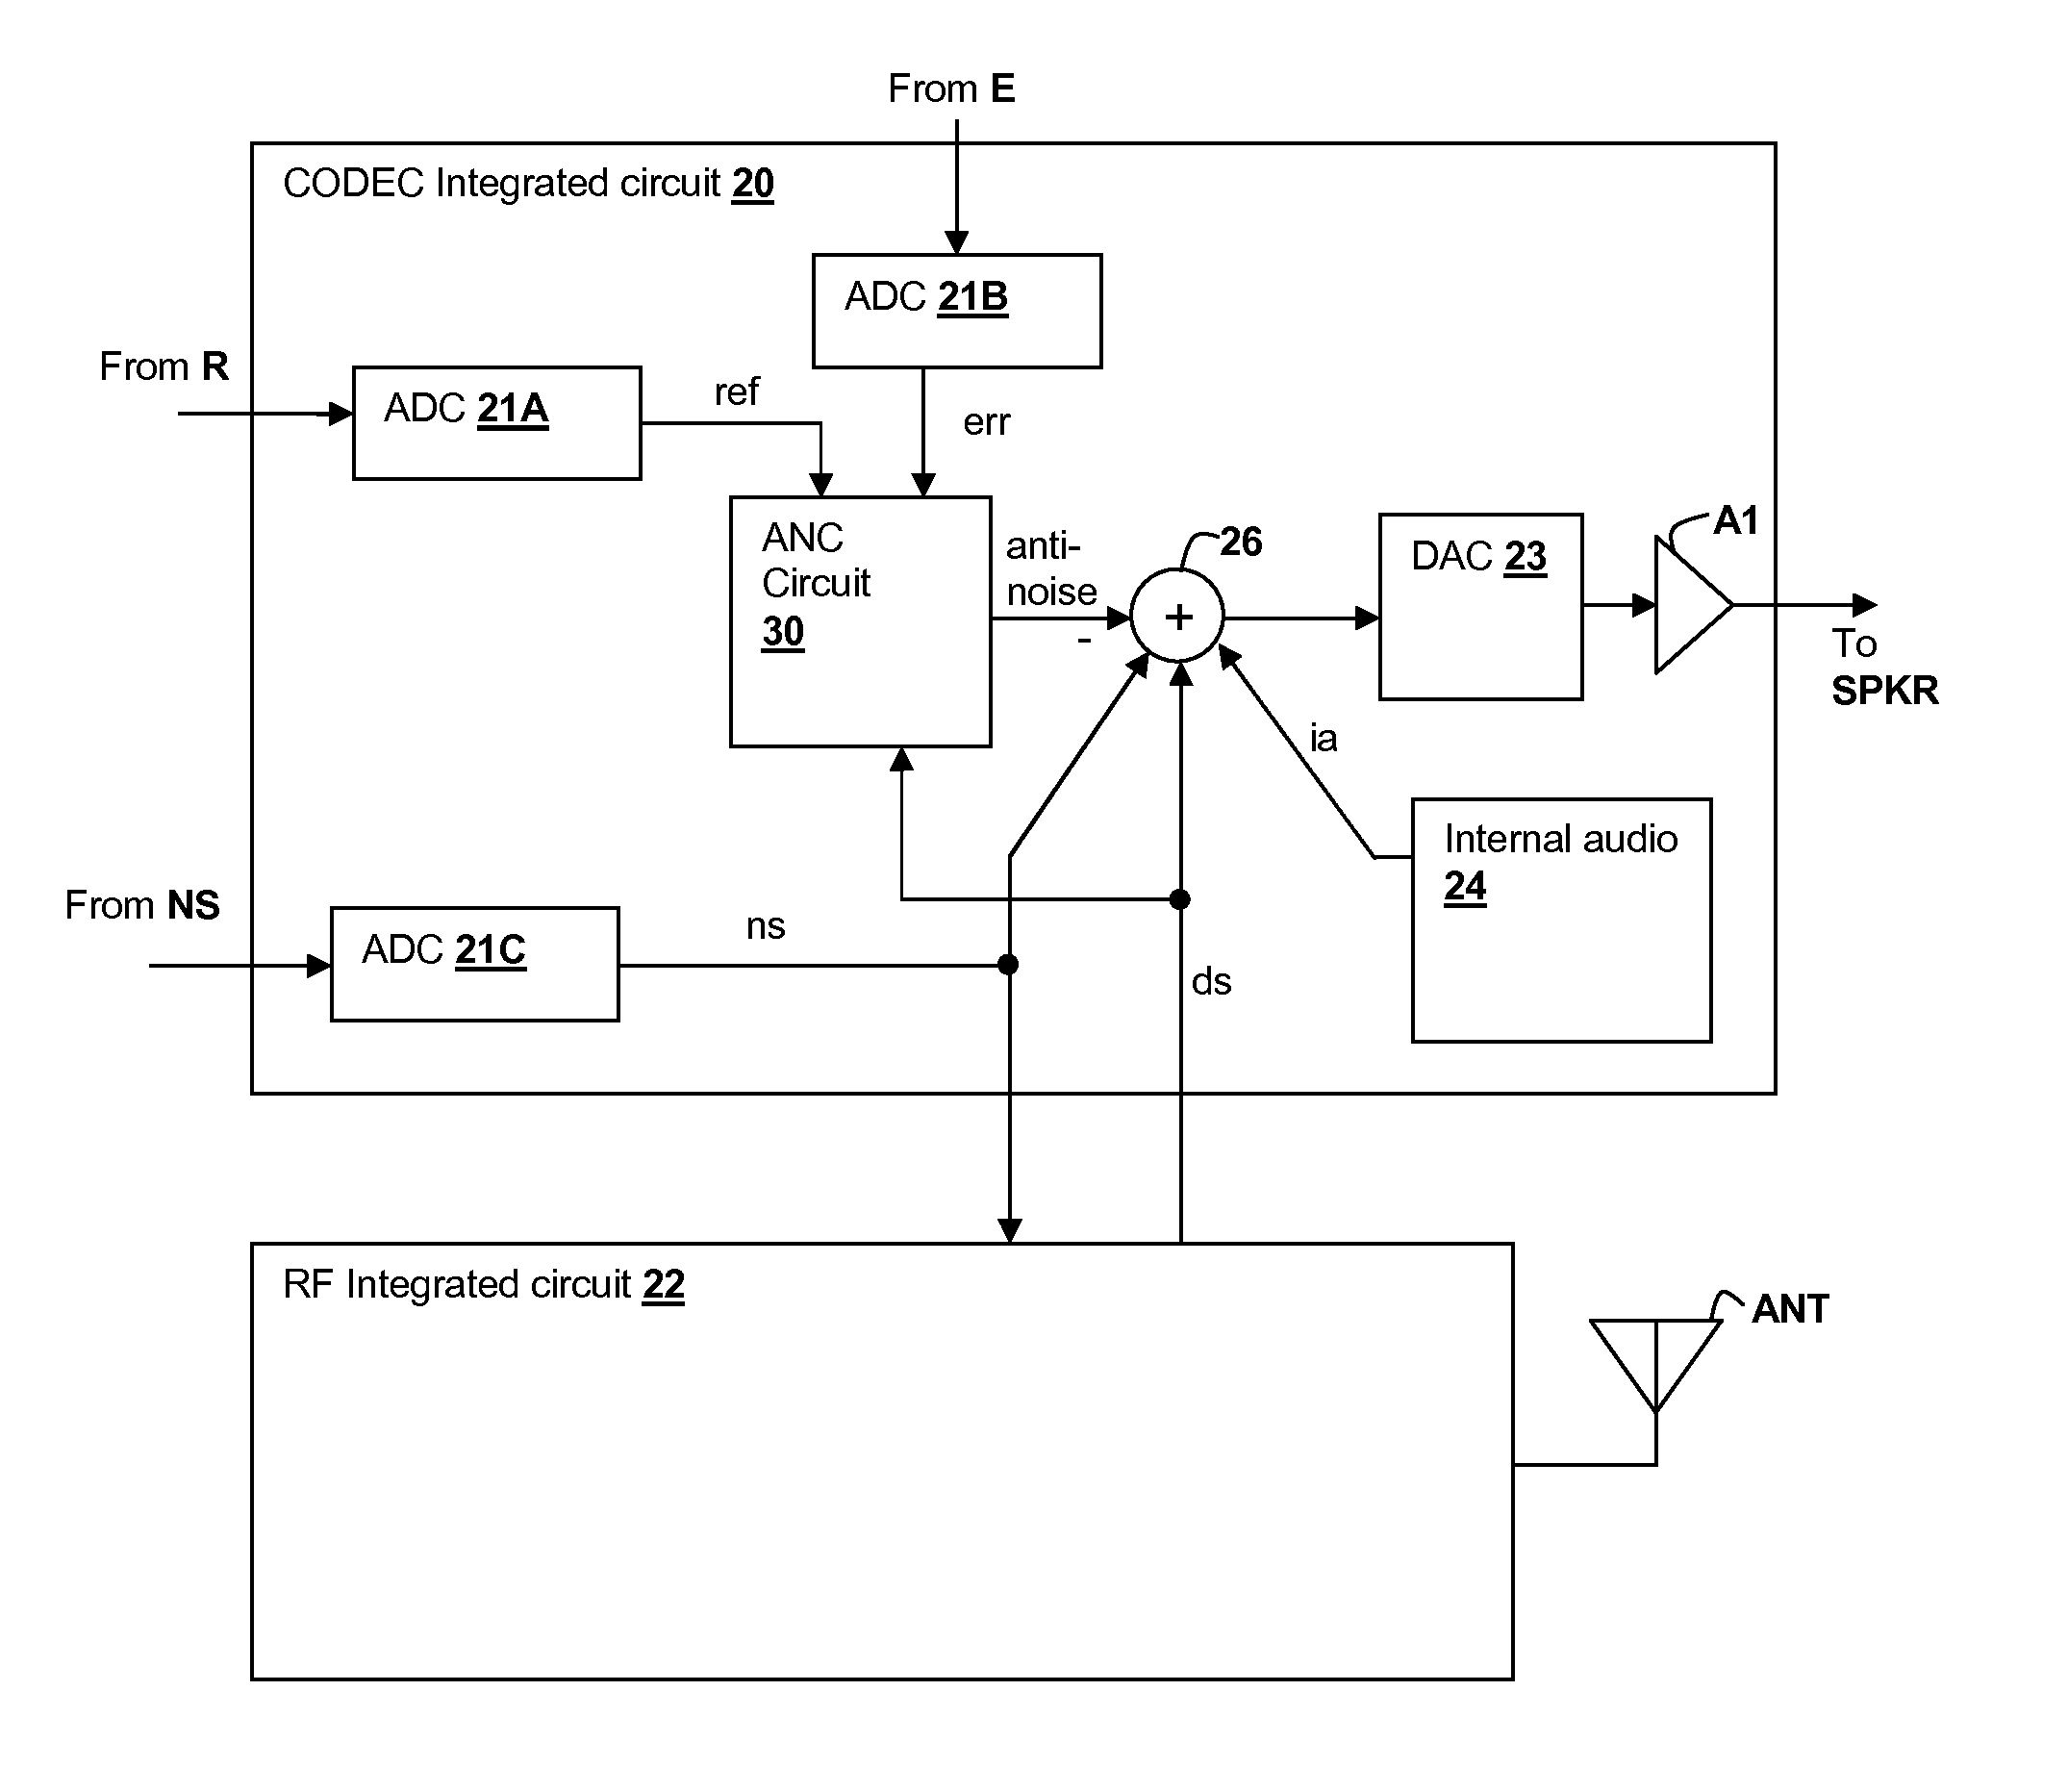 Bandlimiting Anti-noise in personal audio devices having adaptive noise cancellation (ANC)